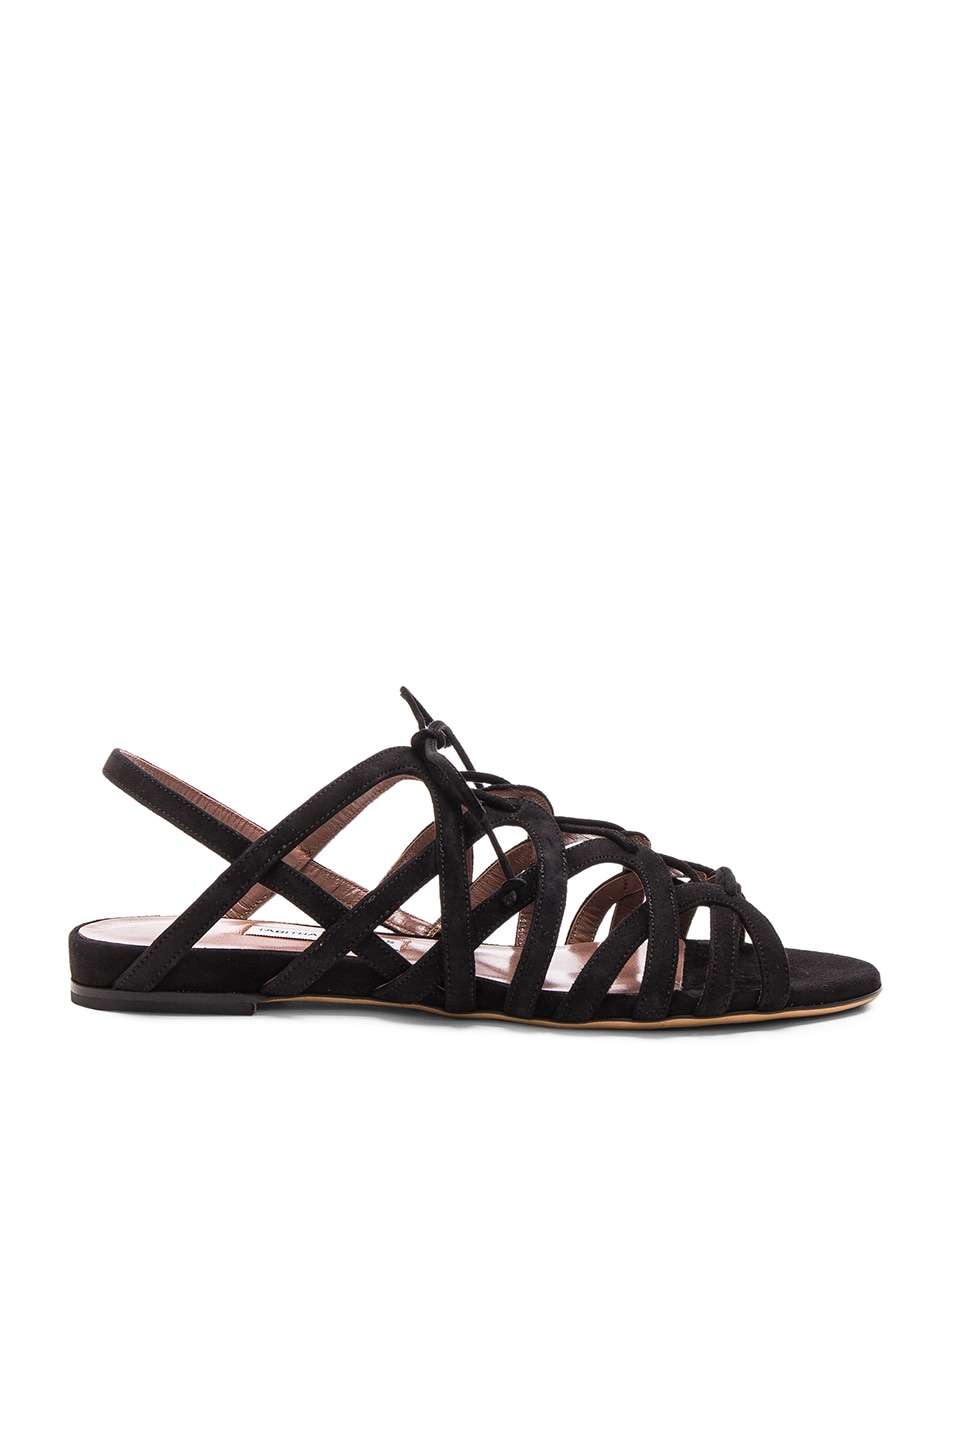 Image 1 of Tabitha Simmons Suede Emmie Sandals in Black Kidsuede